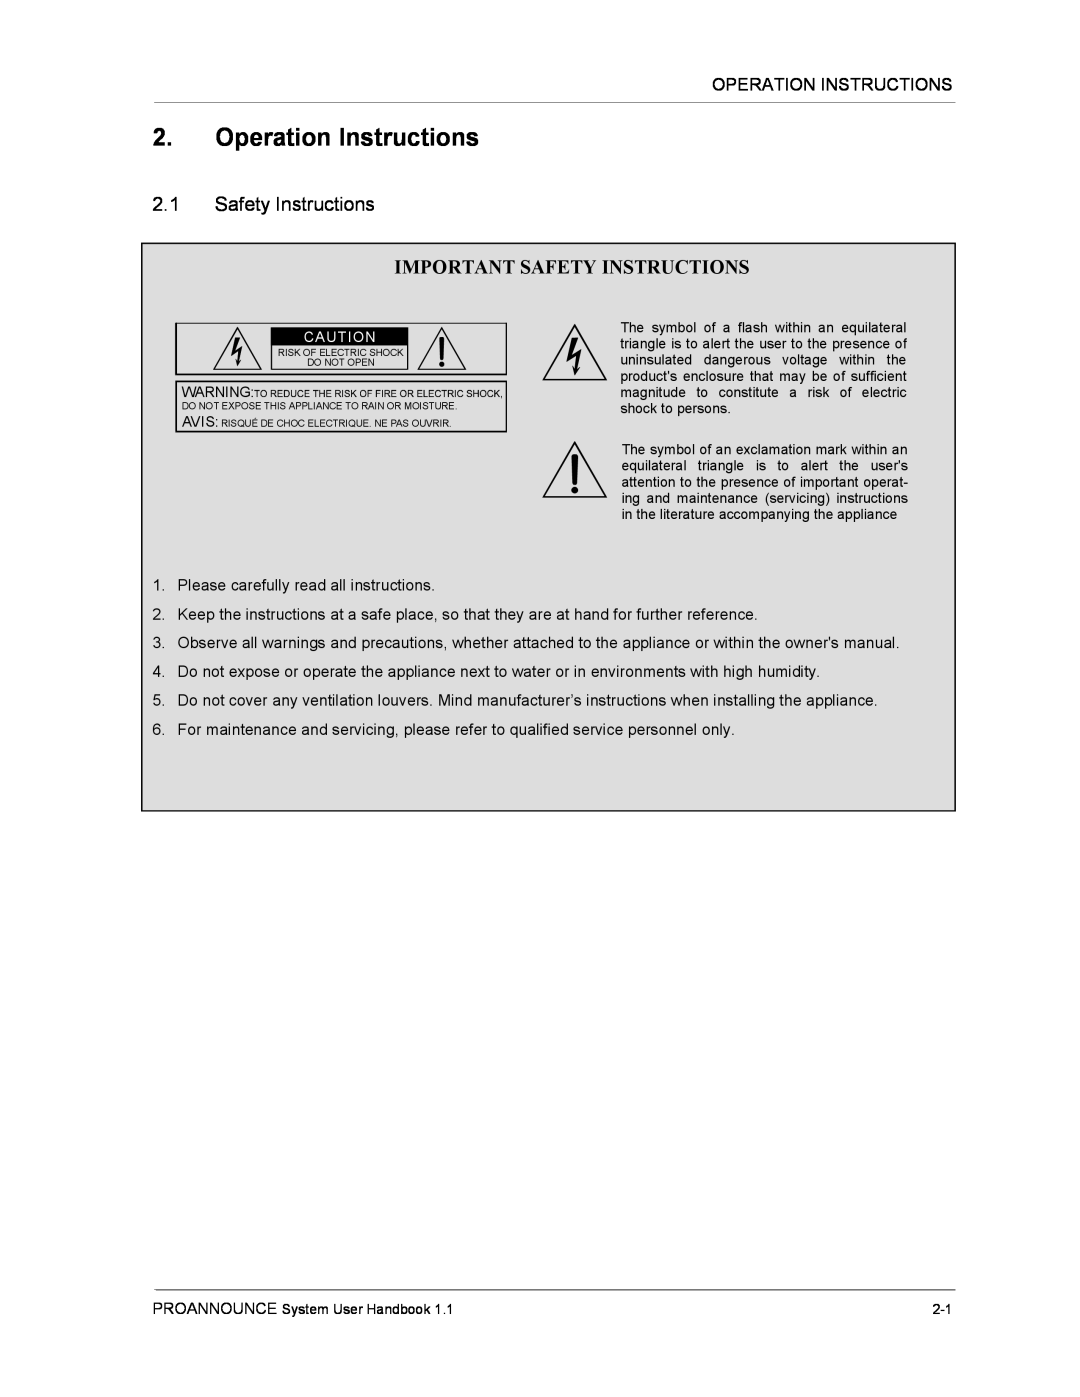 Dynacord DPM 4000 manual Operation Instructions, 2.1Safety Instructions, Important Safety Instructions 